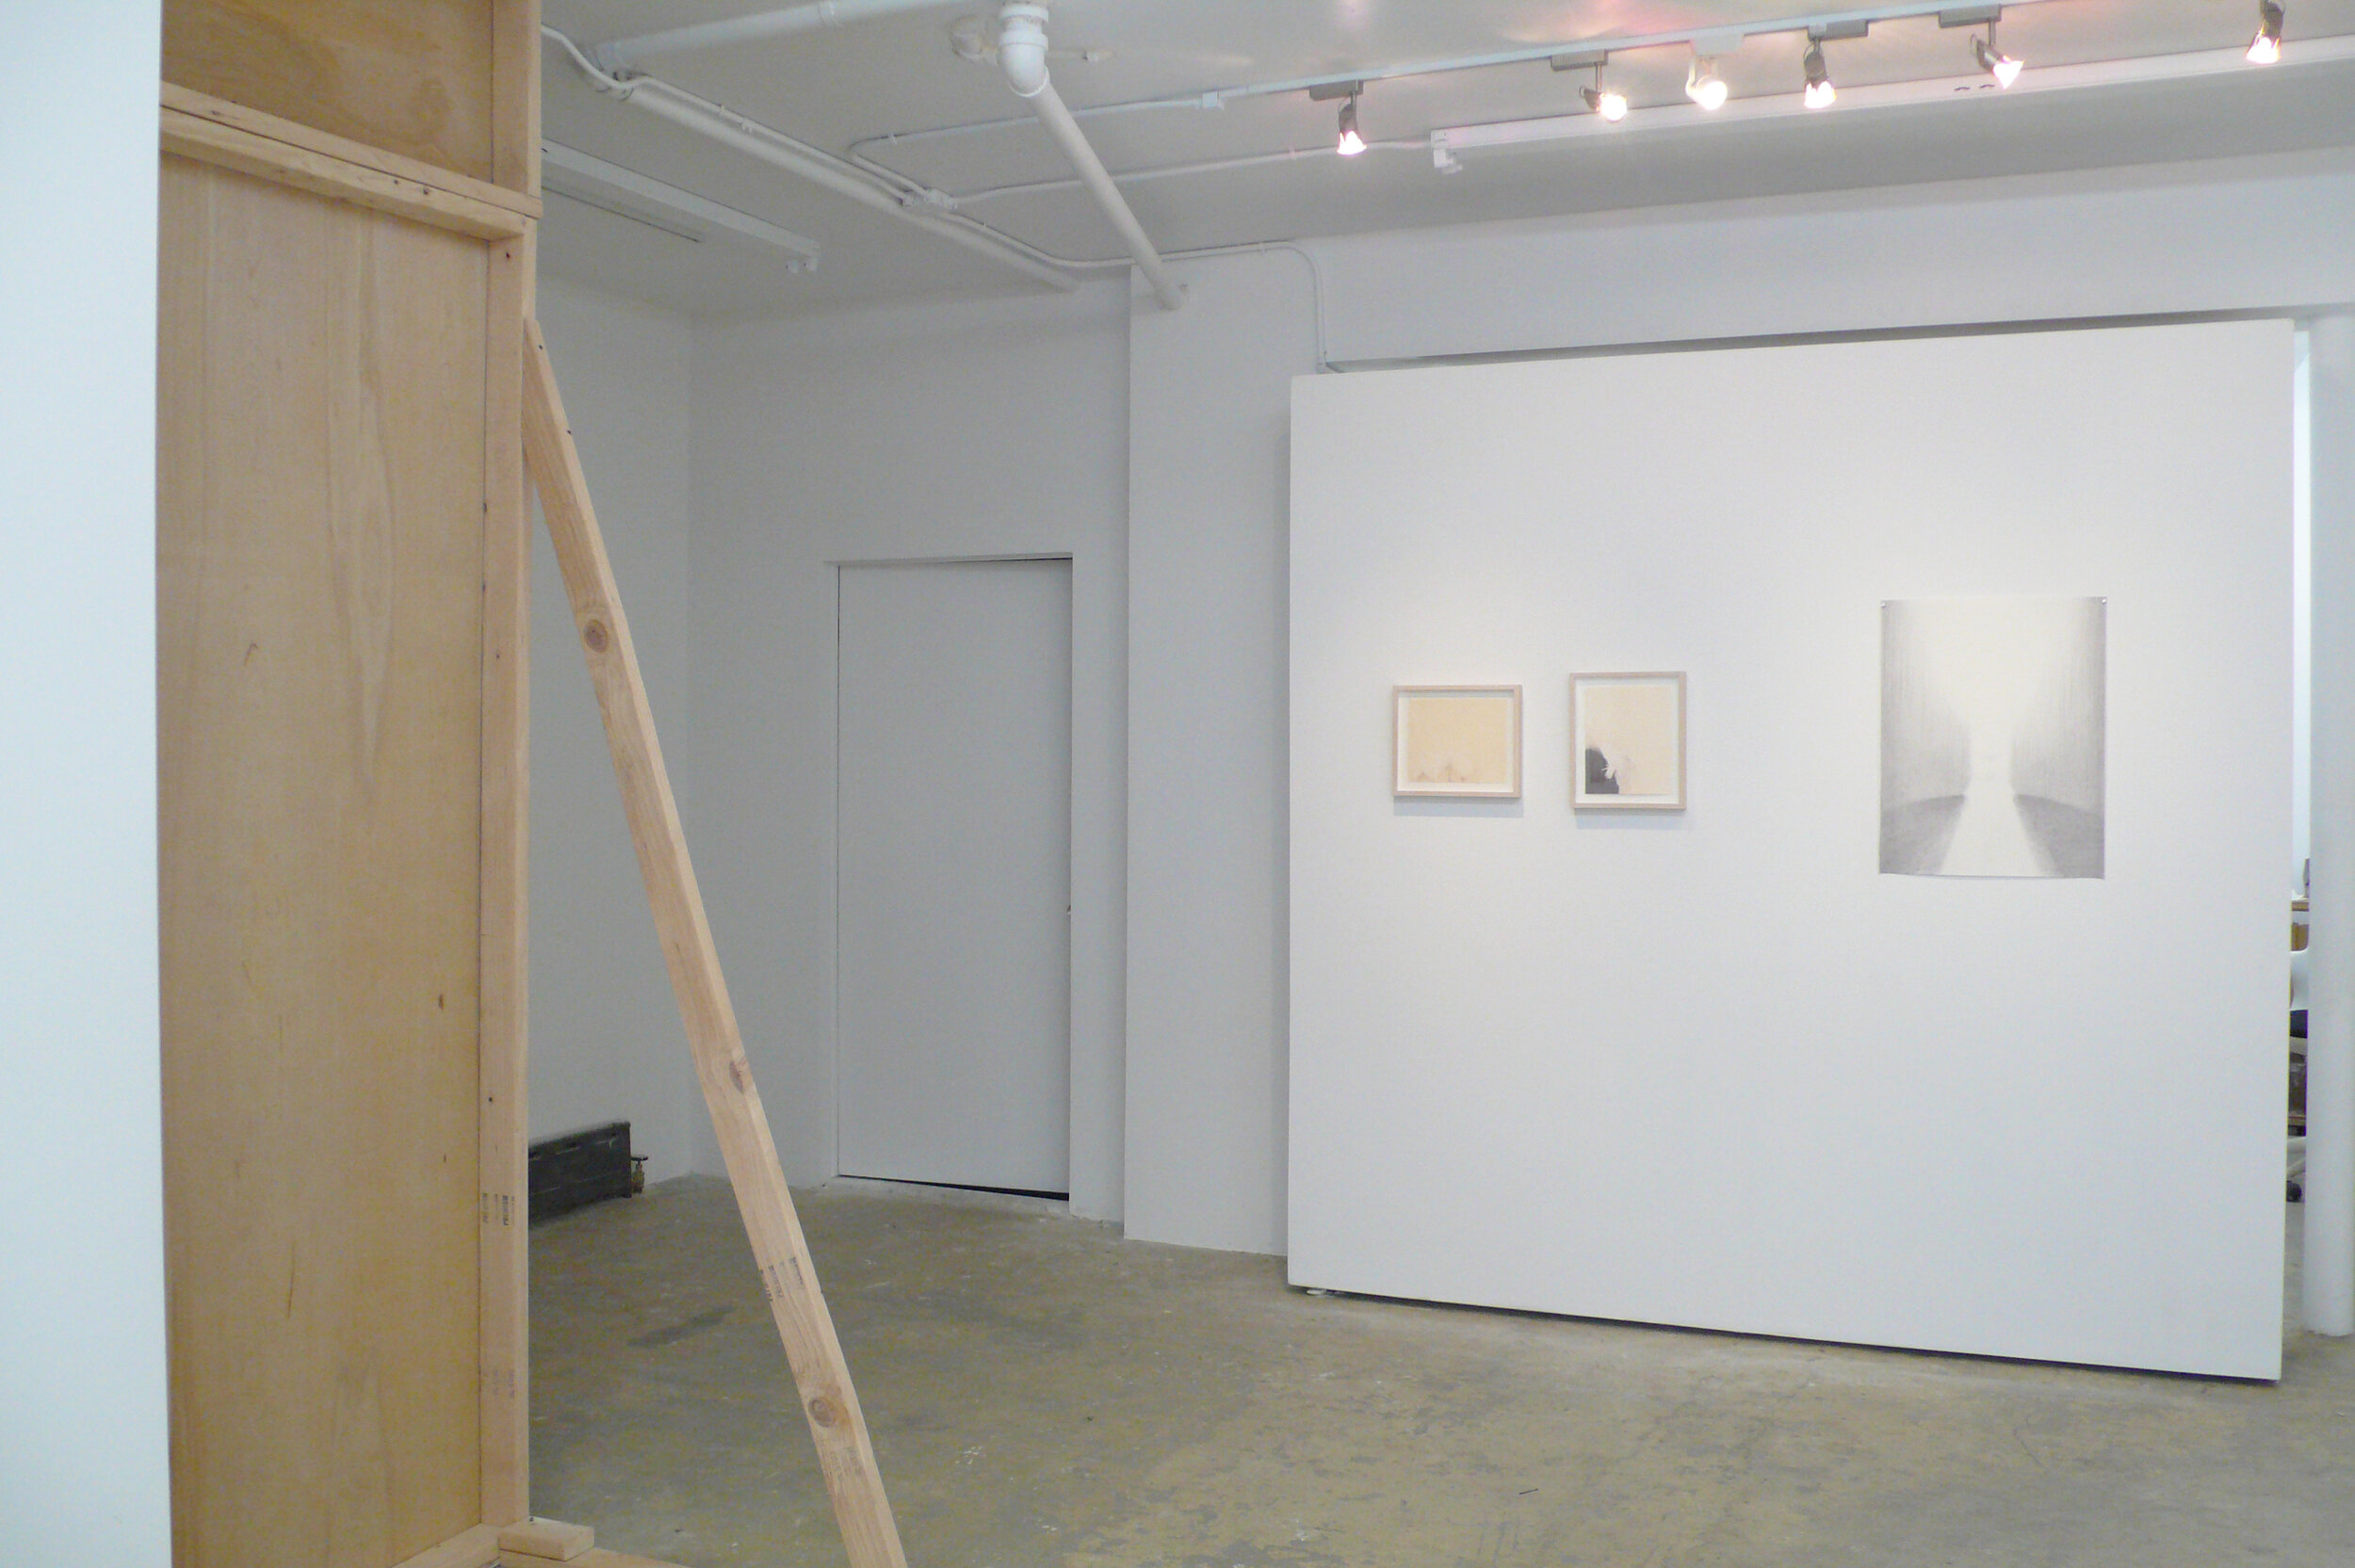 Installation image from the 2011 Adam Hayes exhibition, Of the triumph it hosted, at Cindy Rucker Gallery